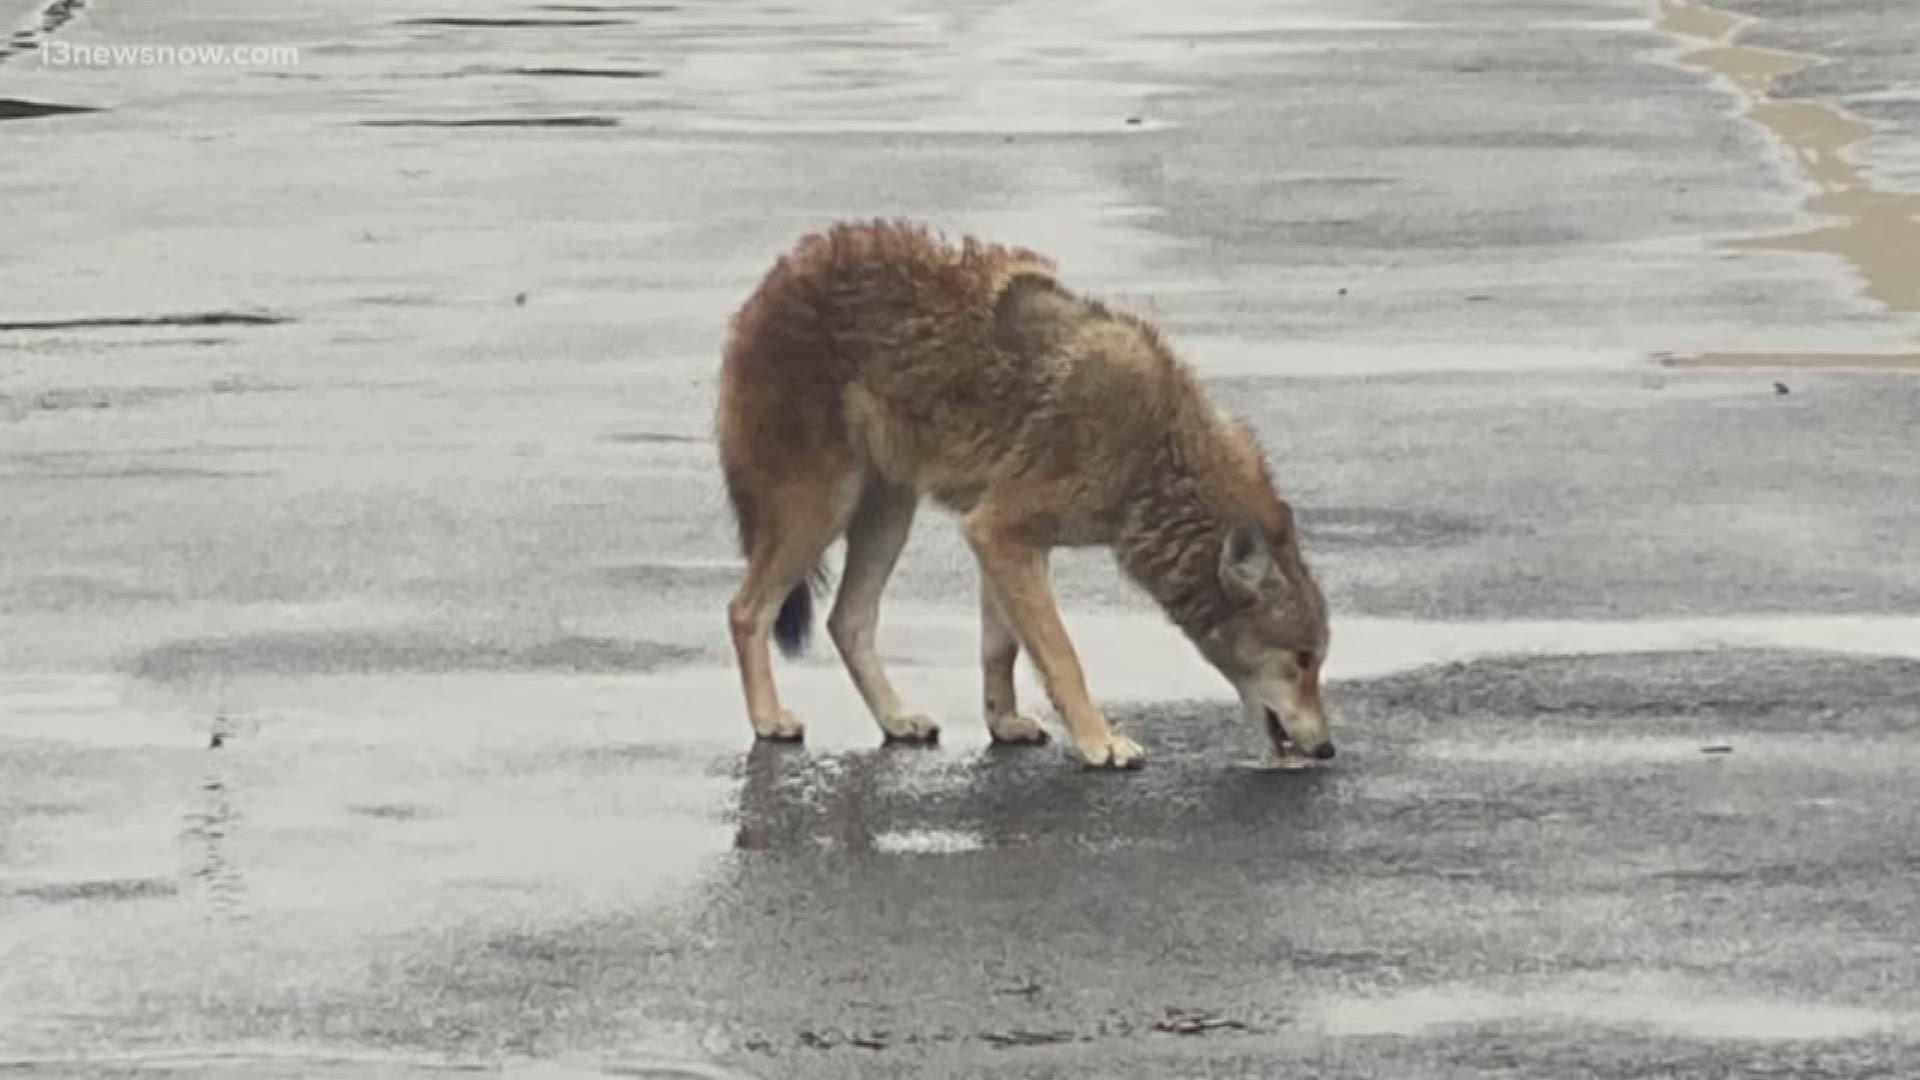 Virginia Beach Animal Control said it is not unusual to see coyotes in Virginia Beach. However, some shoppers said they're worried about their safety.